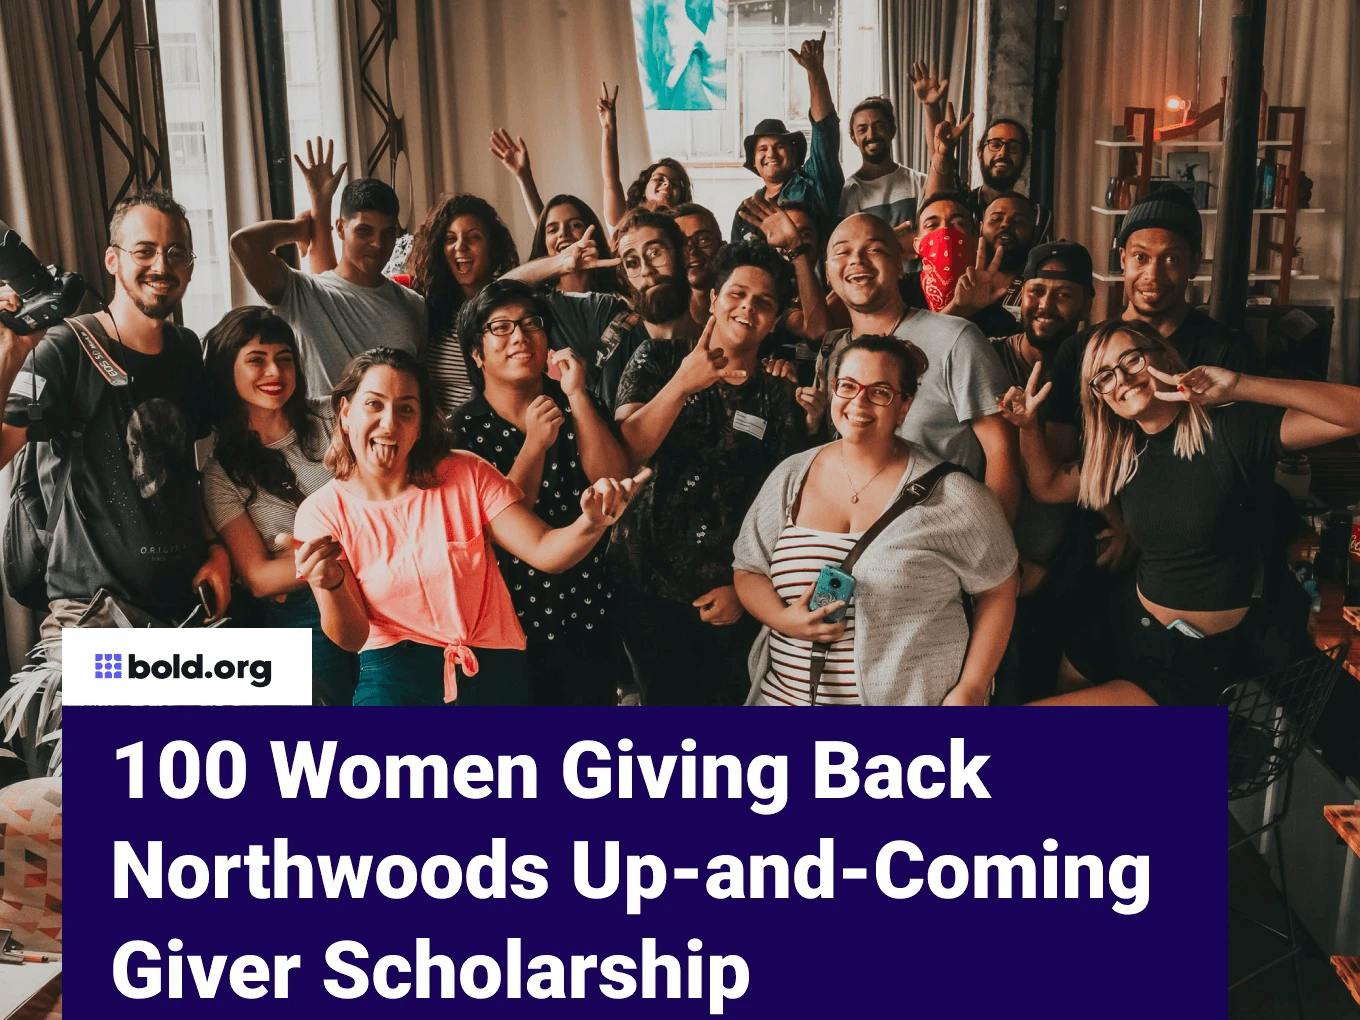 100 Women Giving Back Northwoods Up-and-Coming Giver Scholarship